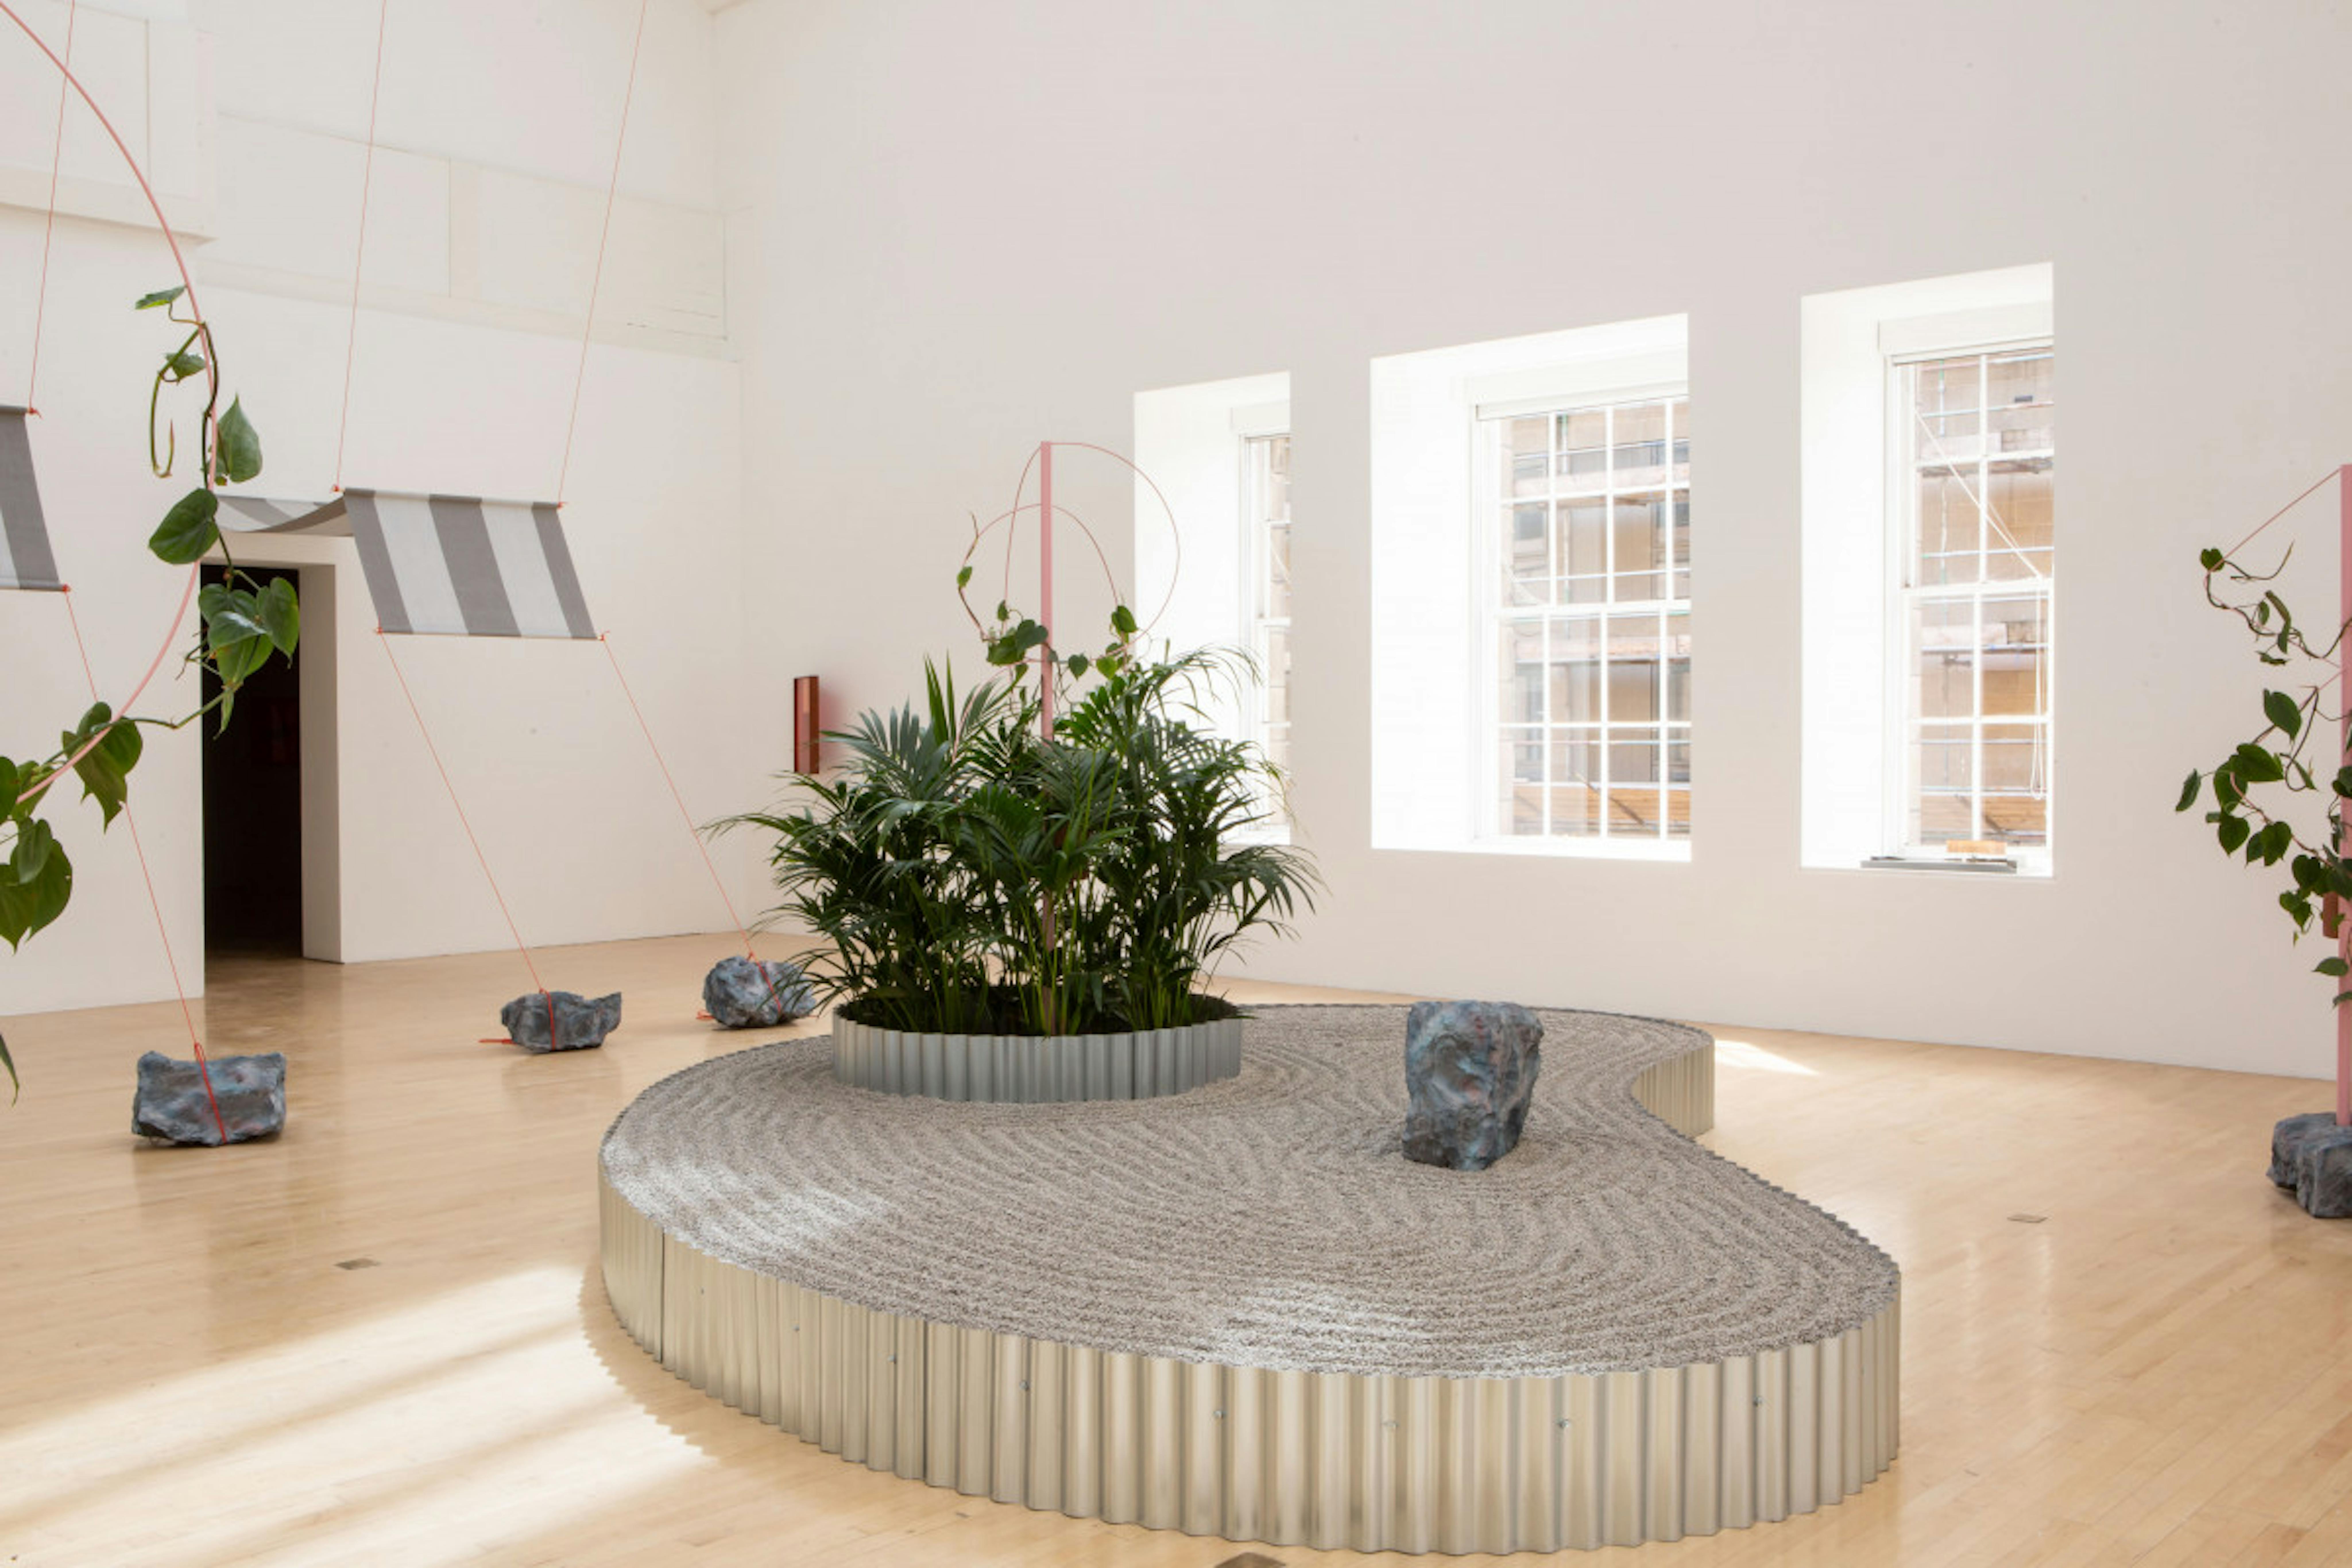 An installation in a bright white gallery. A platform curves around and houses a series of plants. Sculptures are dotted throughout the gallery. 